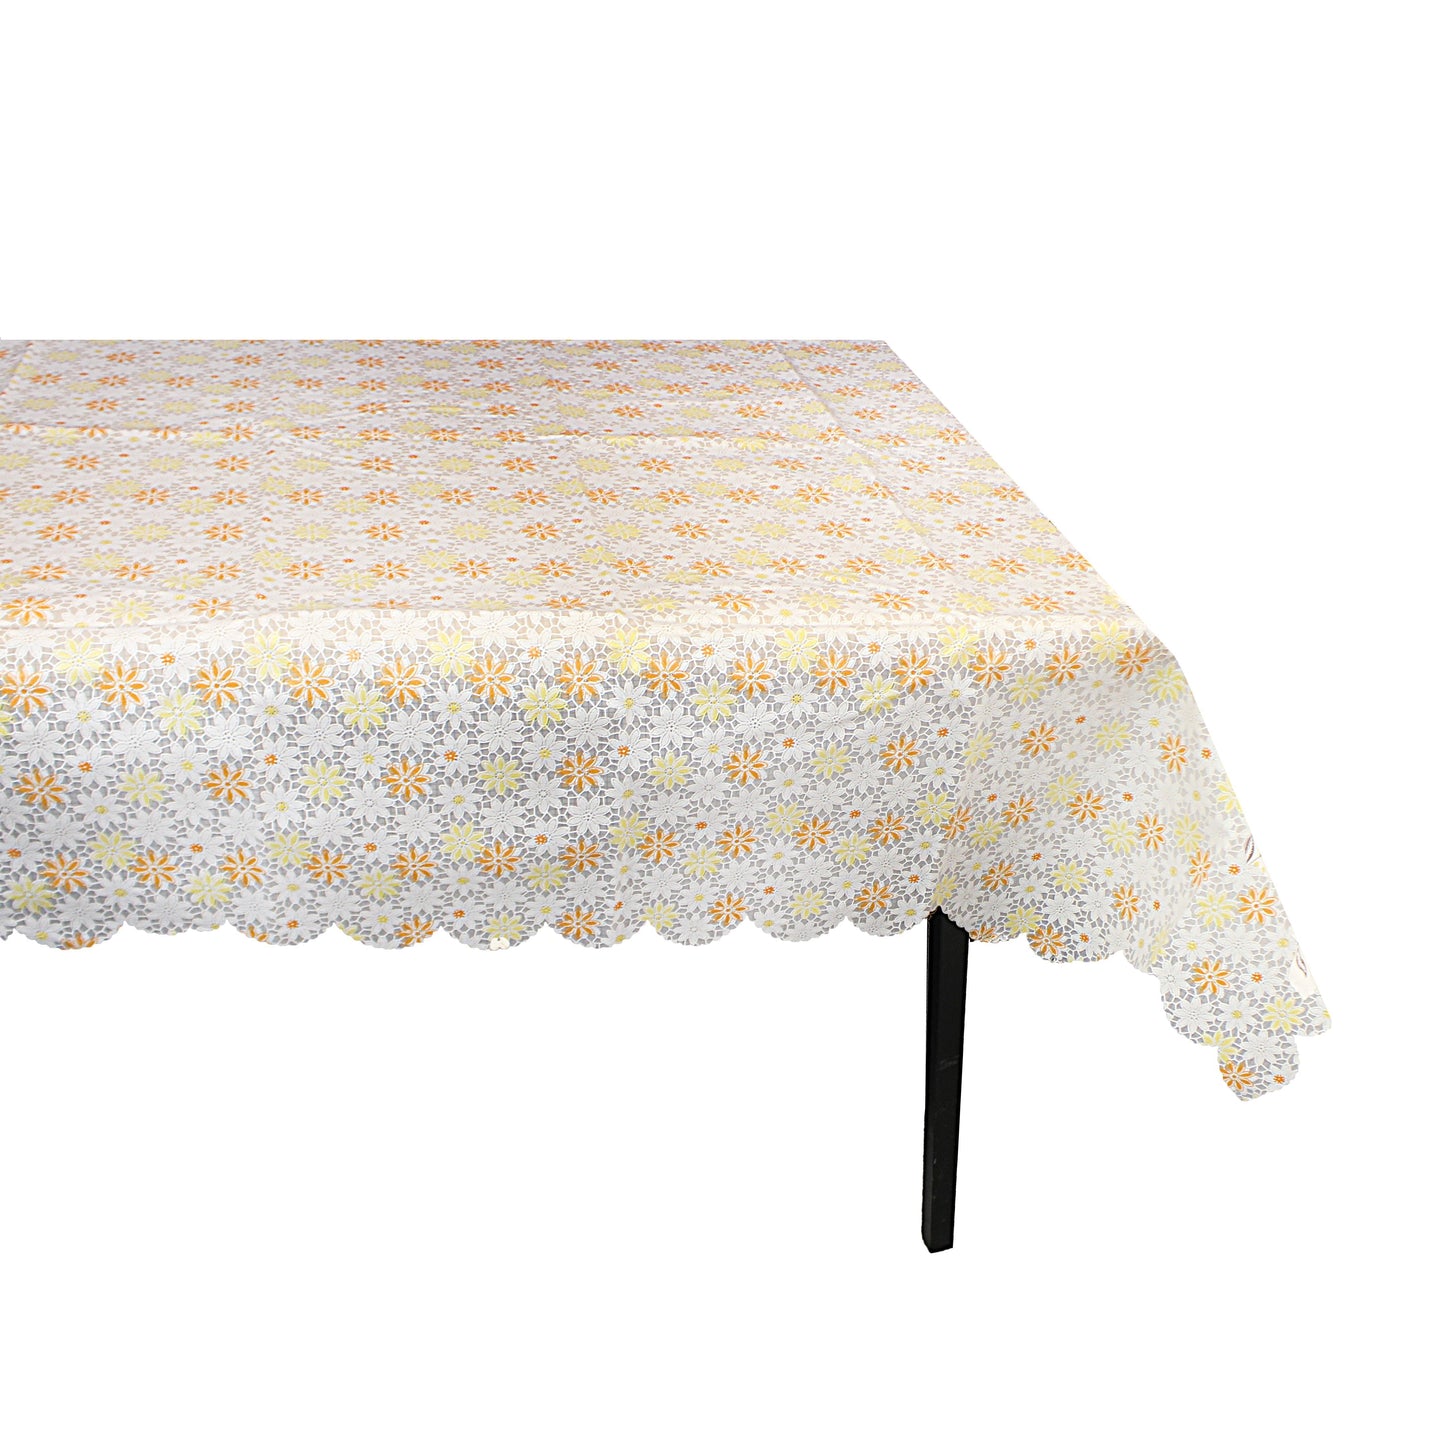 Table Cloth 152 x 228 cm Assorted Designs 0313 (Parcel Rate)